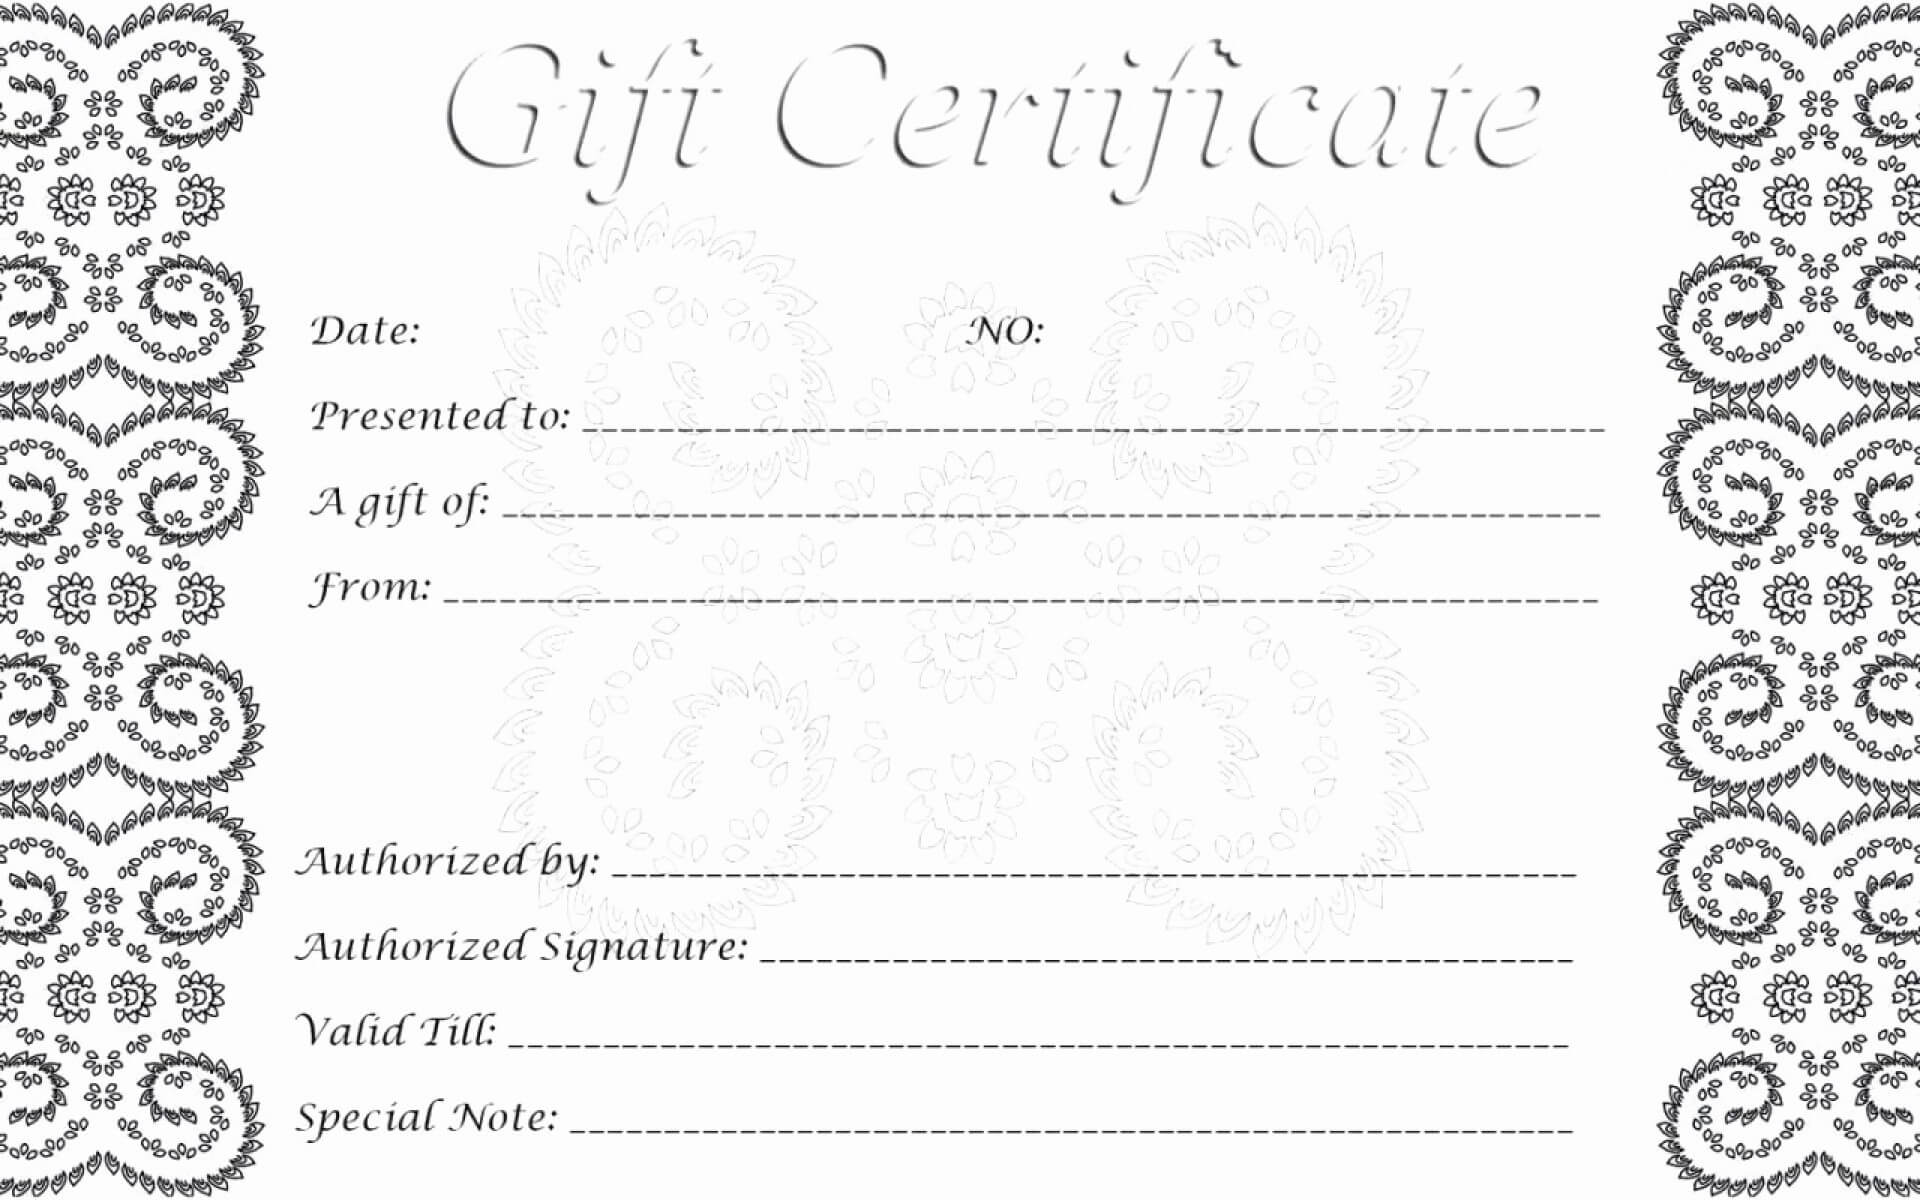 Astounding Blank Gift Certificate Template Ideas Birthday Regarding Black And White Gift Certificate Template Free